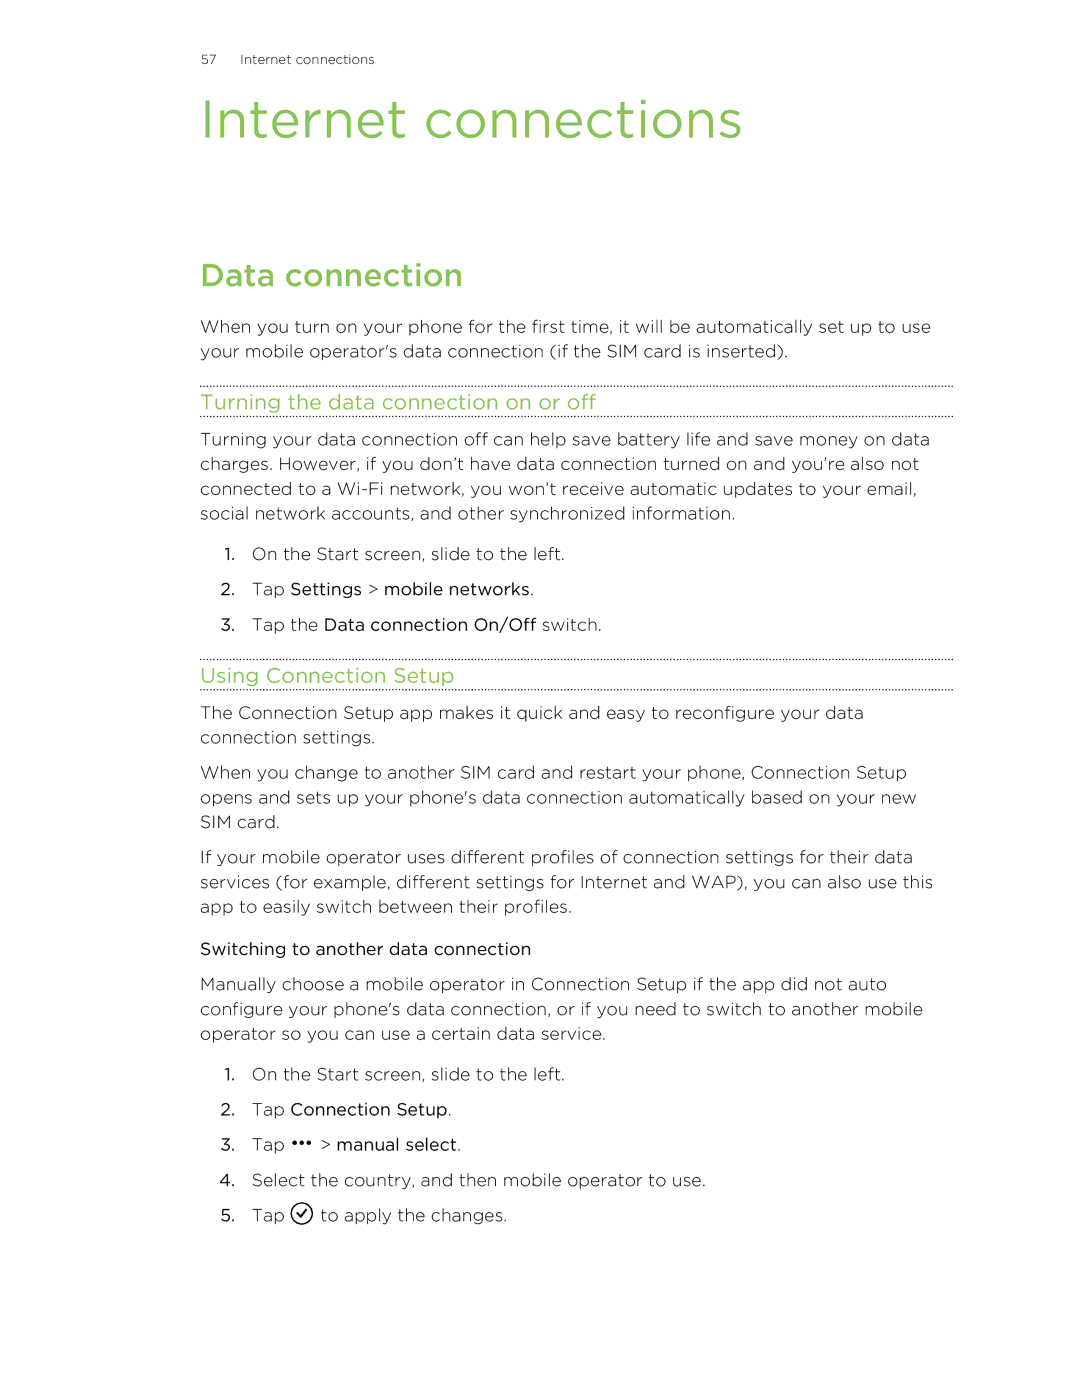 HTC 8X manual Internet connections, Data connection, Turning the data connection on or off, Using Connection Setup 